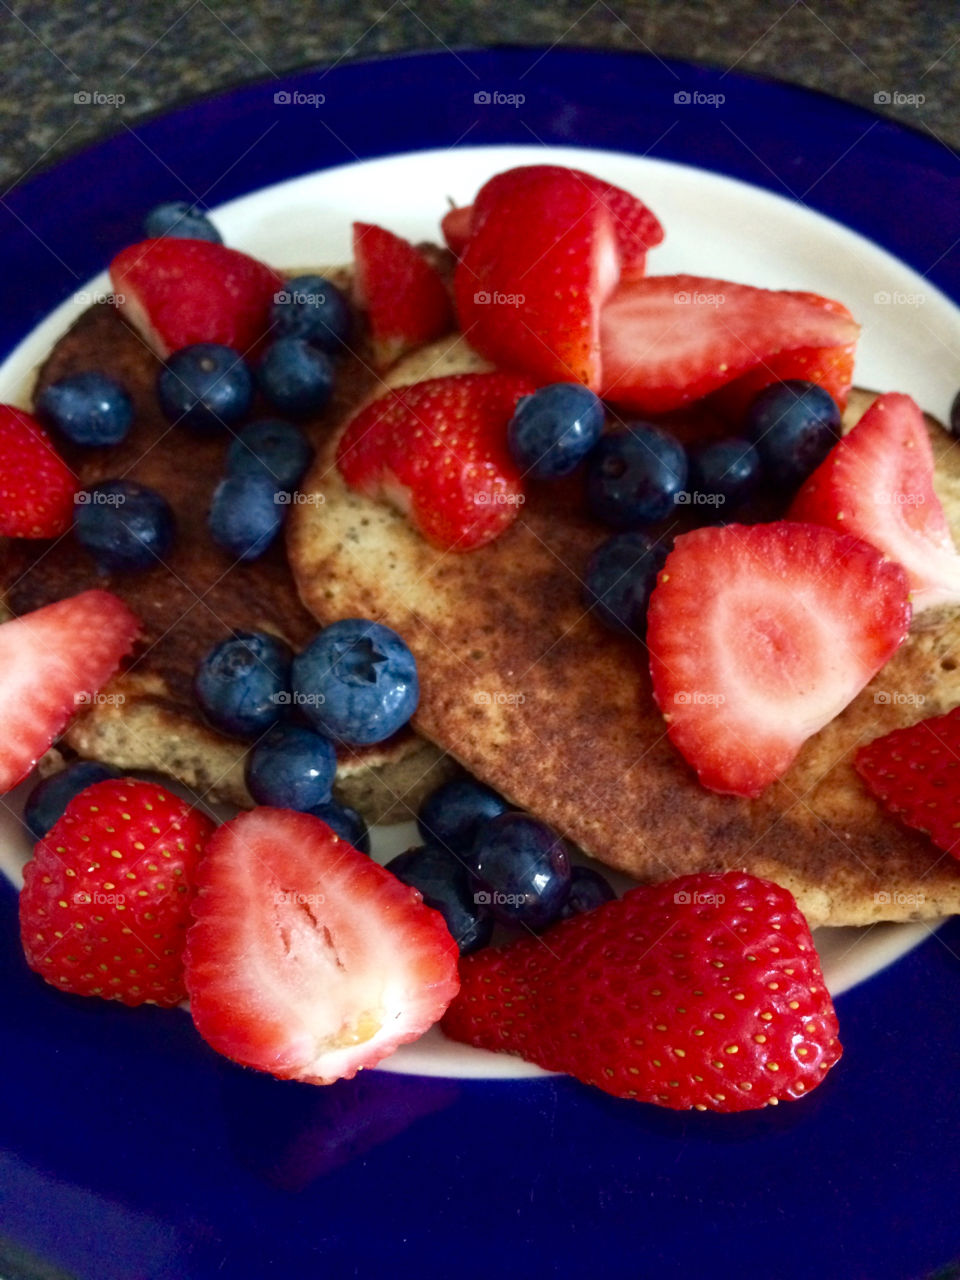 Mixed Berries and Pancakes 